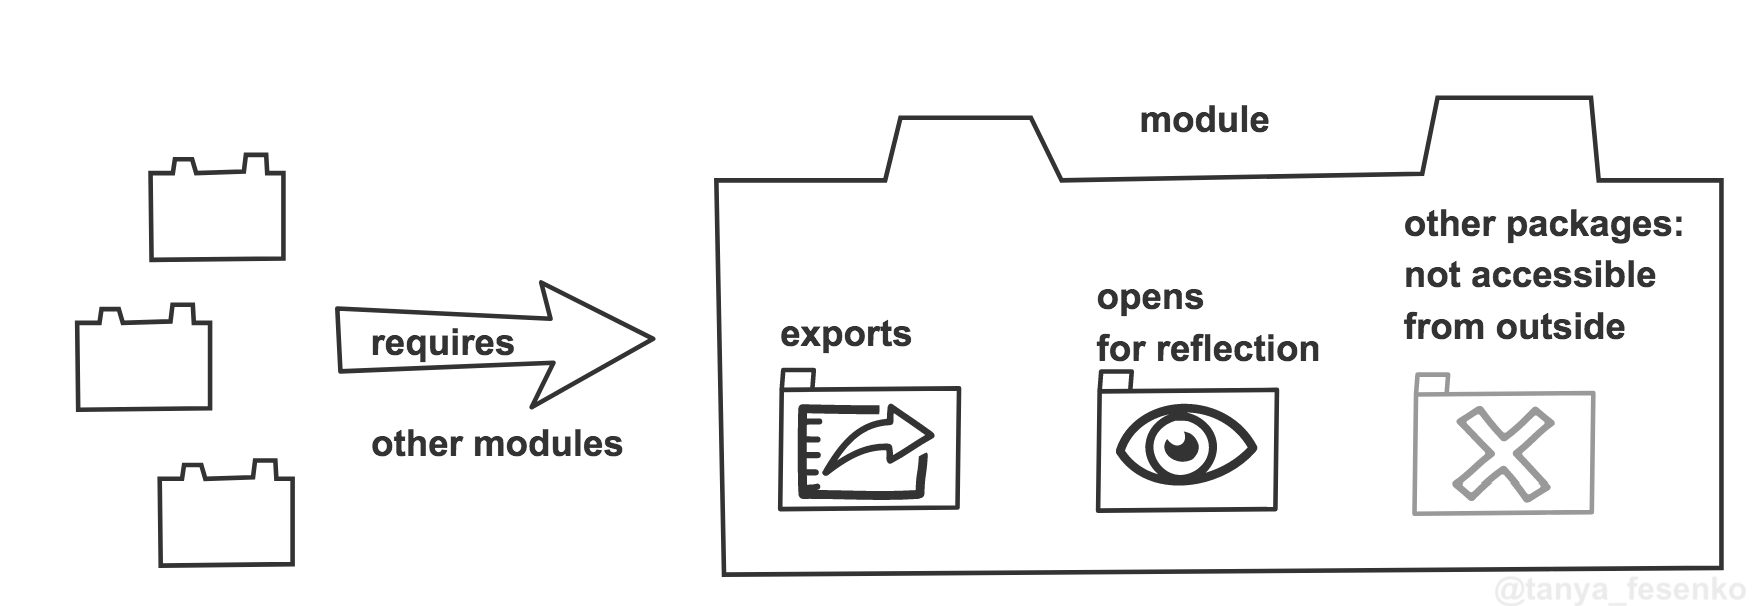 module_overview.png